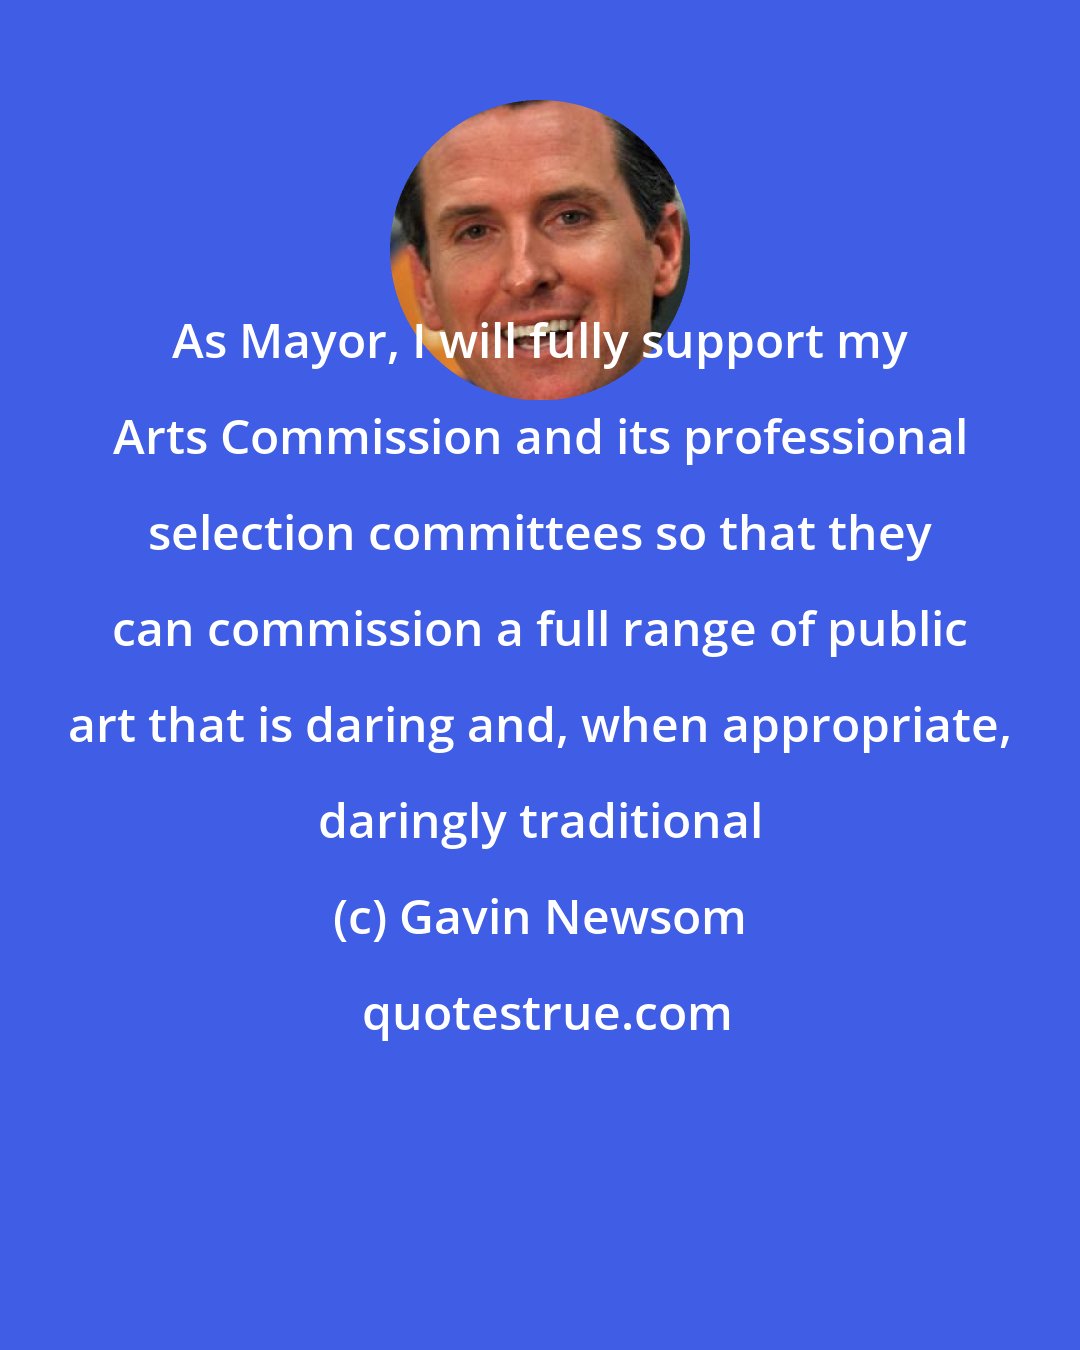 Gavin Newsom: As Mayor, I will fully support my Arts Commission and its professional selection committees so that they can commission a full range of public art that is daring and, when appropriate, daringly traditional